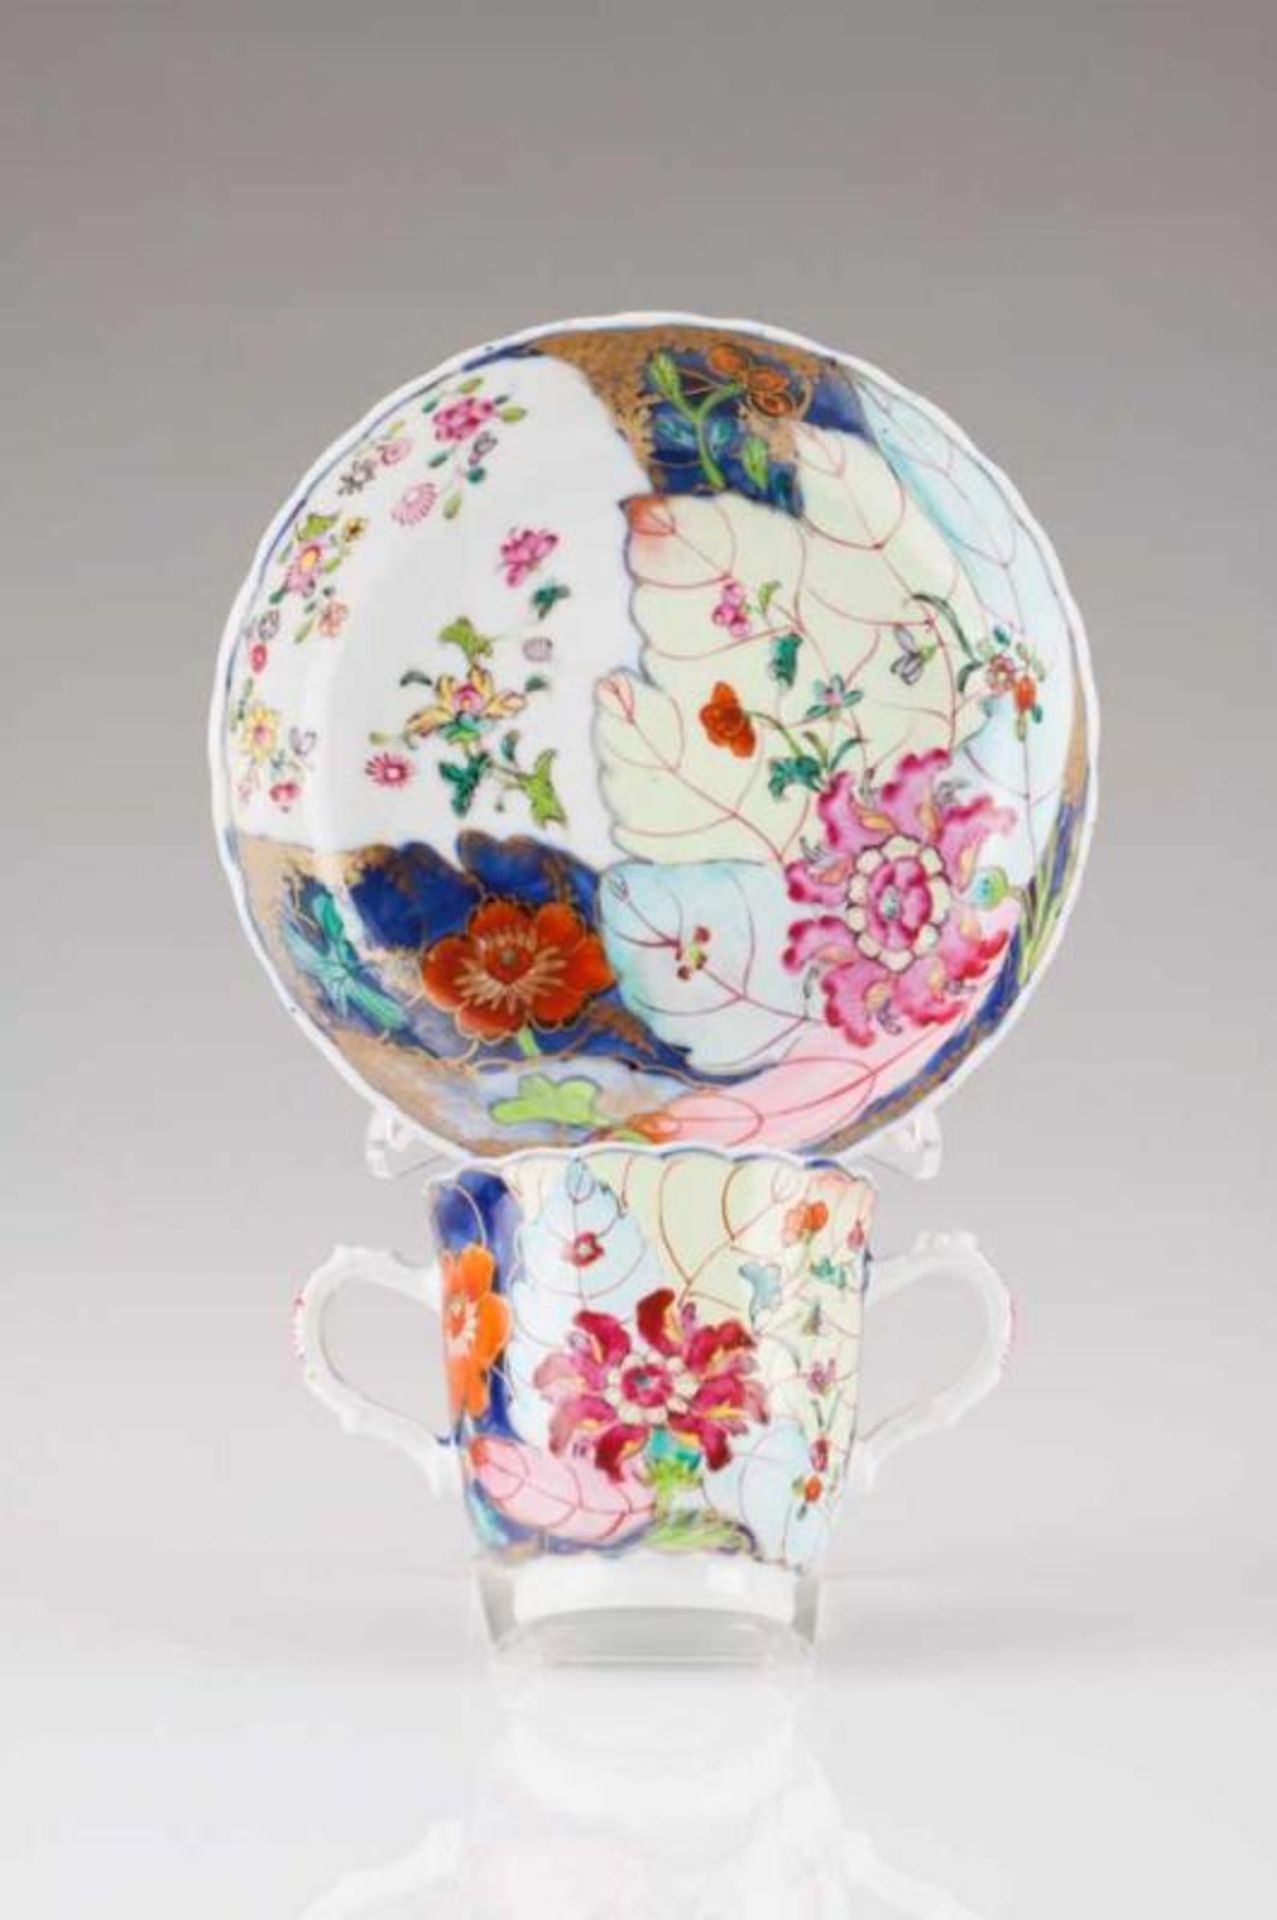 A two handle cup and saucer Chinese export porcelain Polychrome and gilt "Tobacco Leaf" decoration